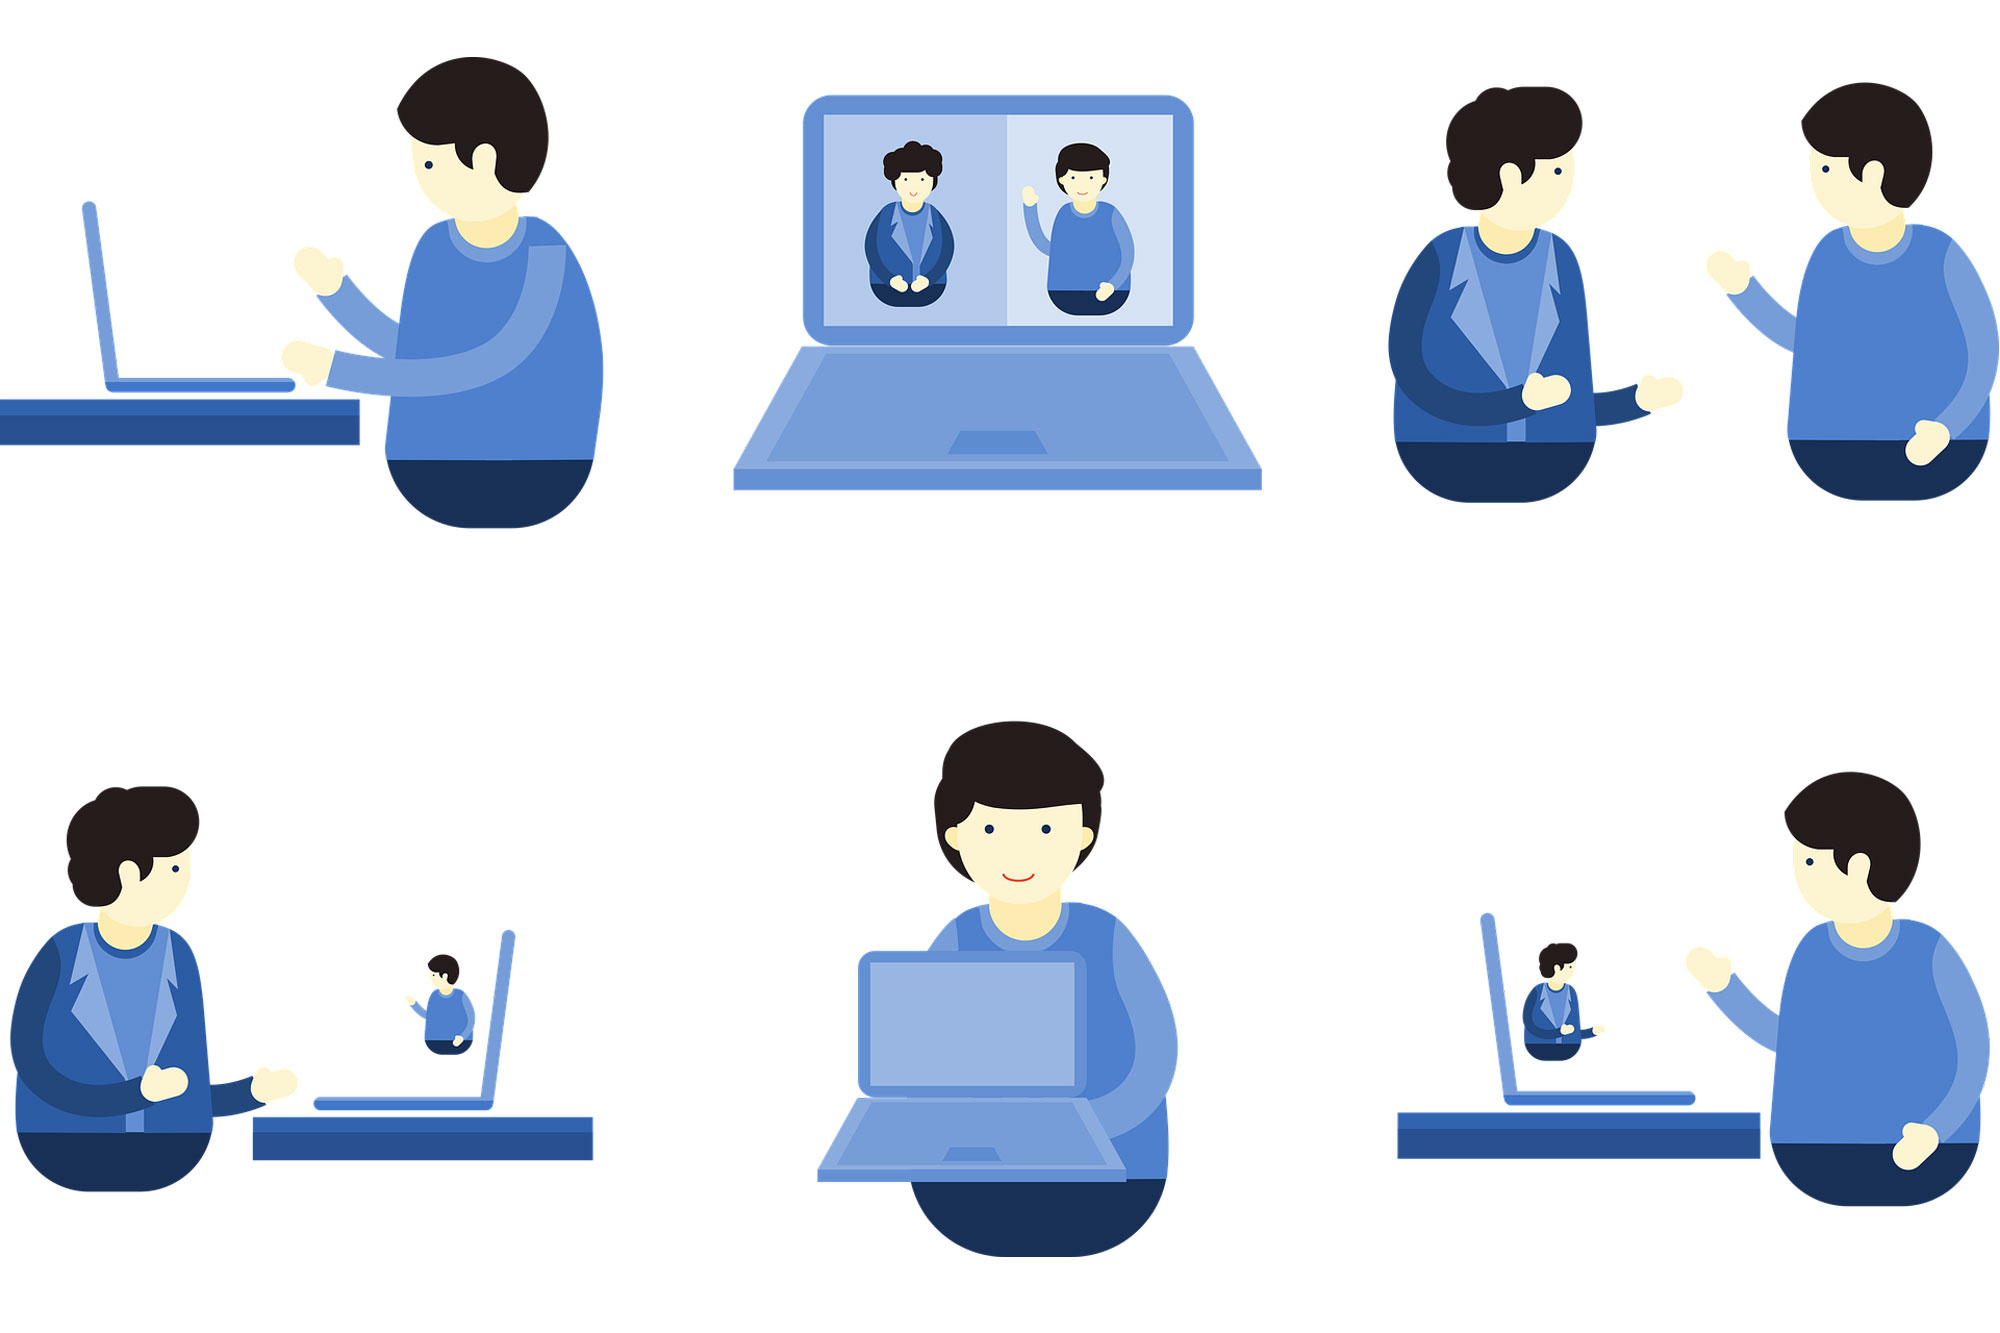 Staying connected through videoconferencing graphic